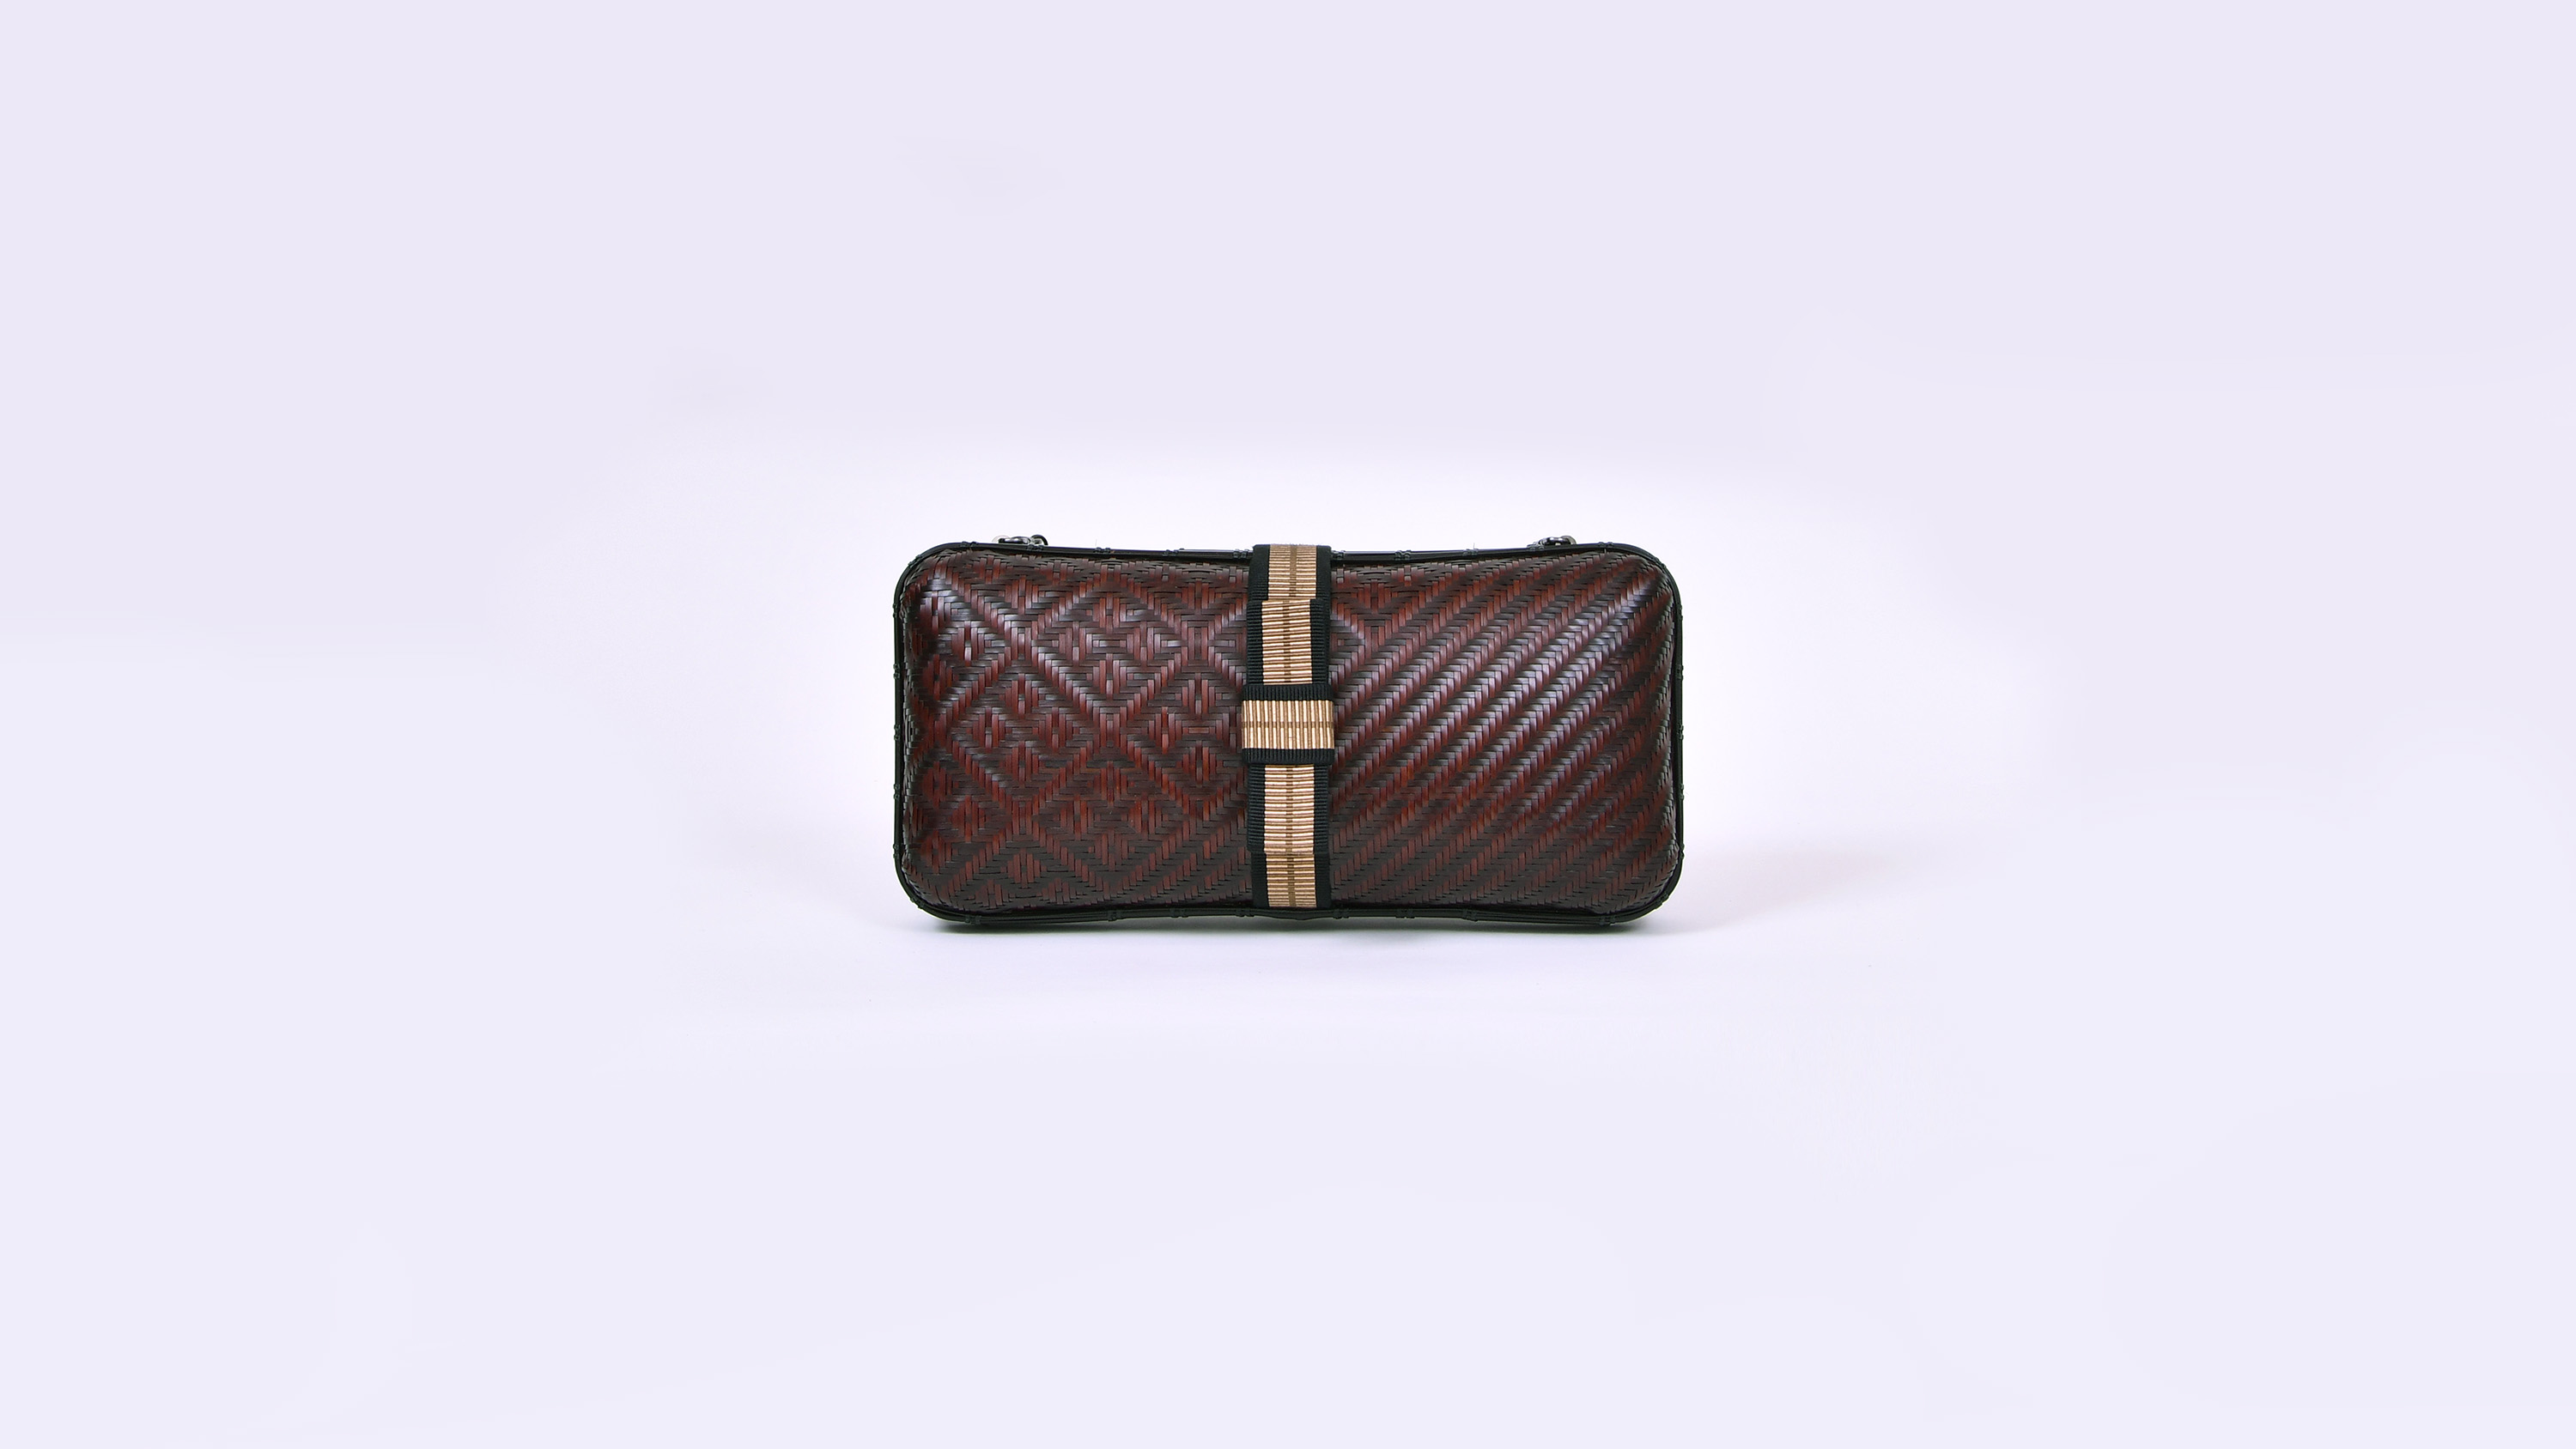 Bamboo leather clutch bag